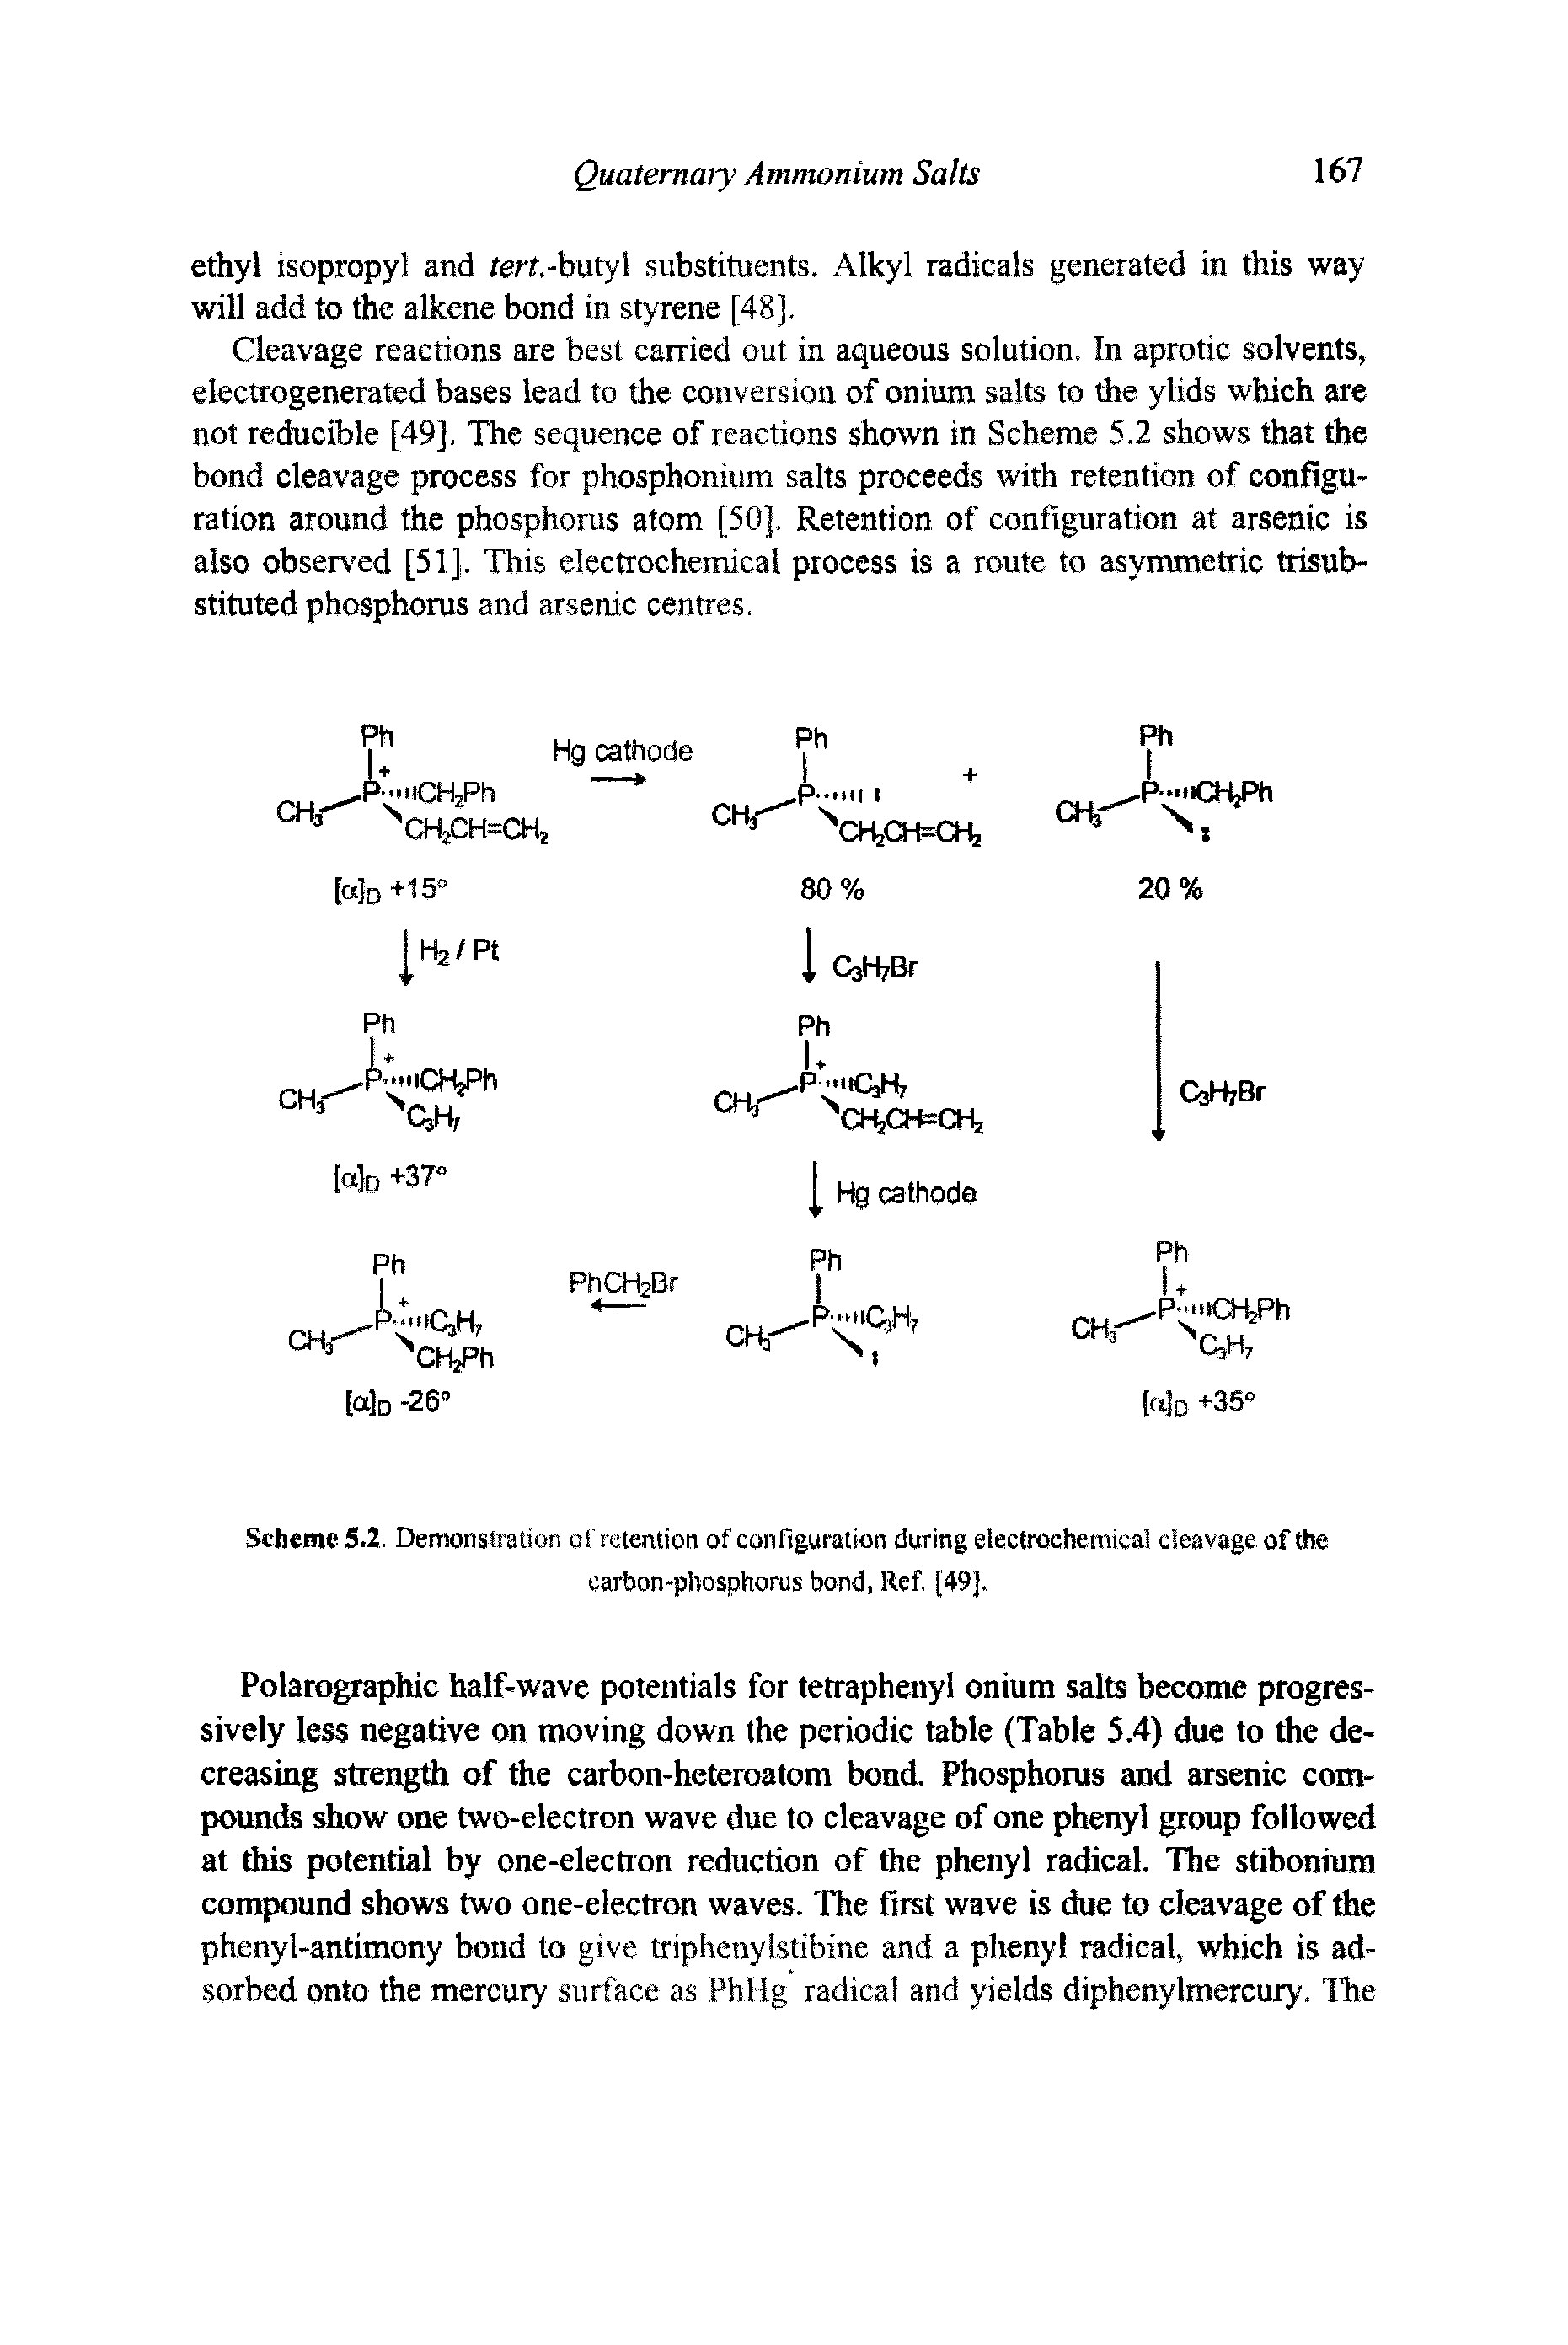 Scheme 5.2. Demonstration of retention of configuration during electrochemical cleavage of the carbon-phosphorus bond, Ref. [49. ...